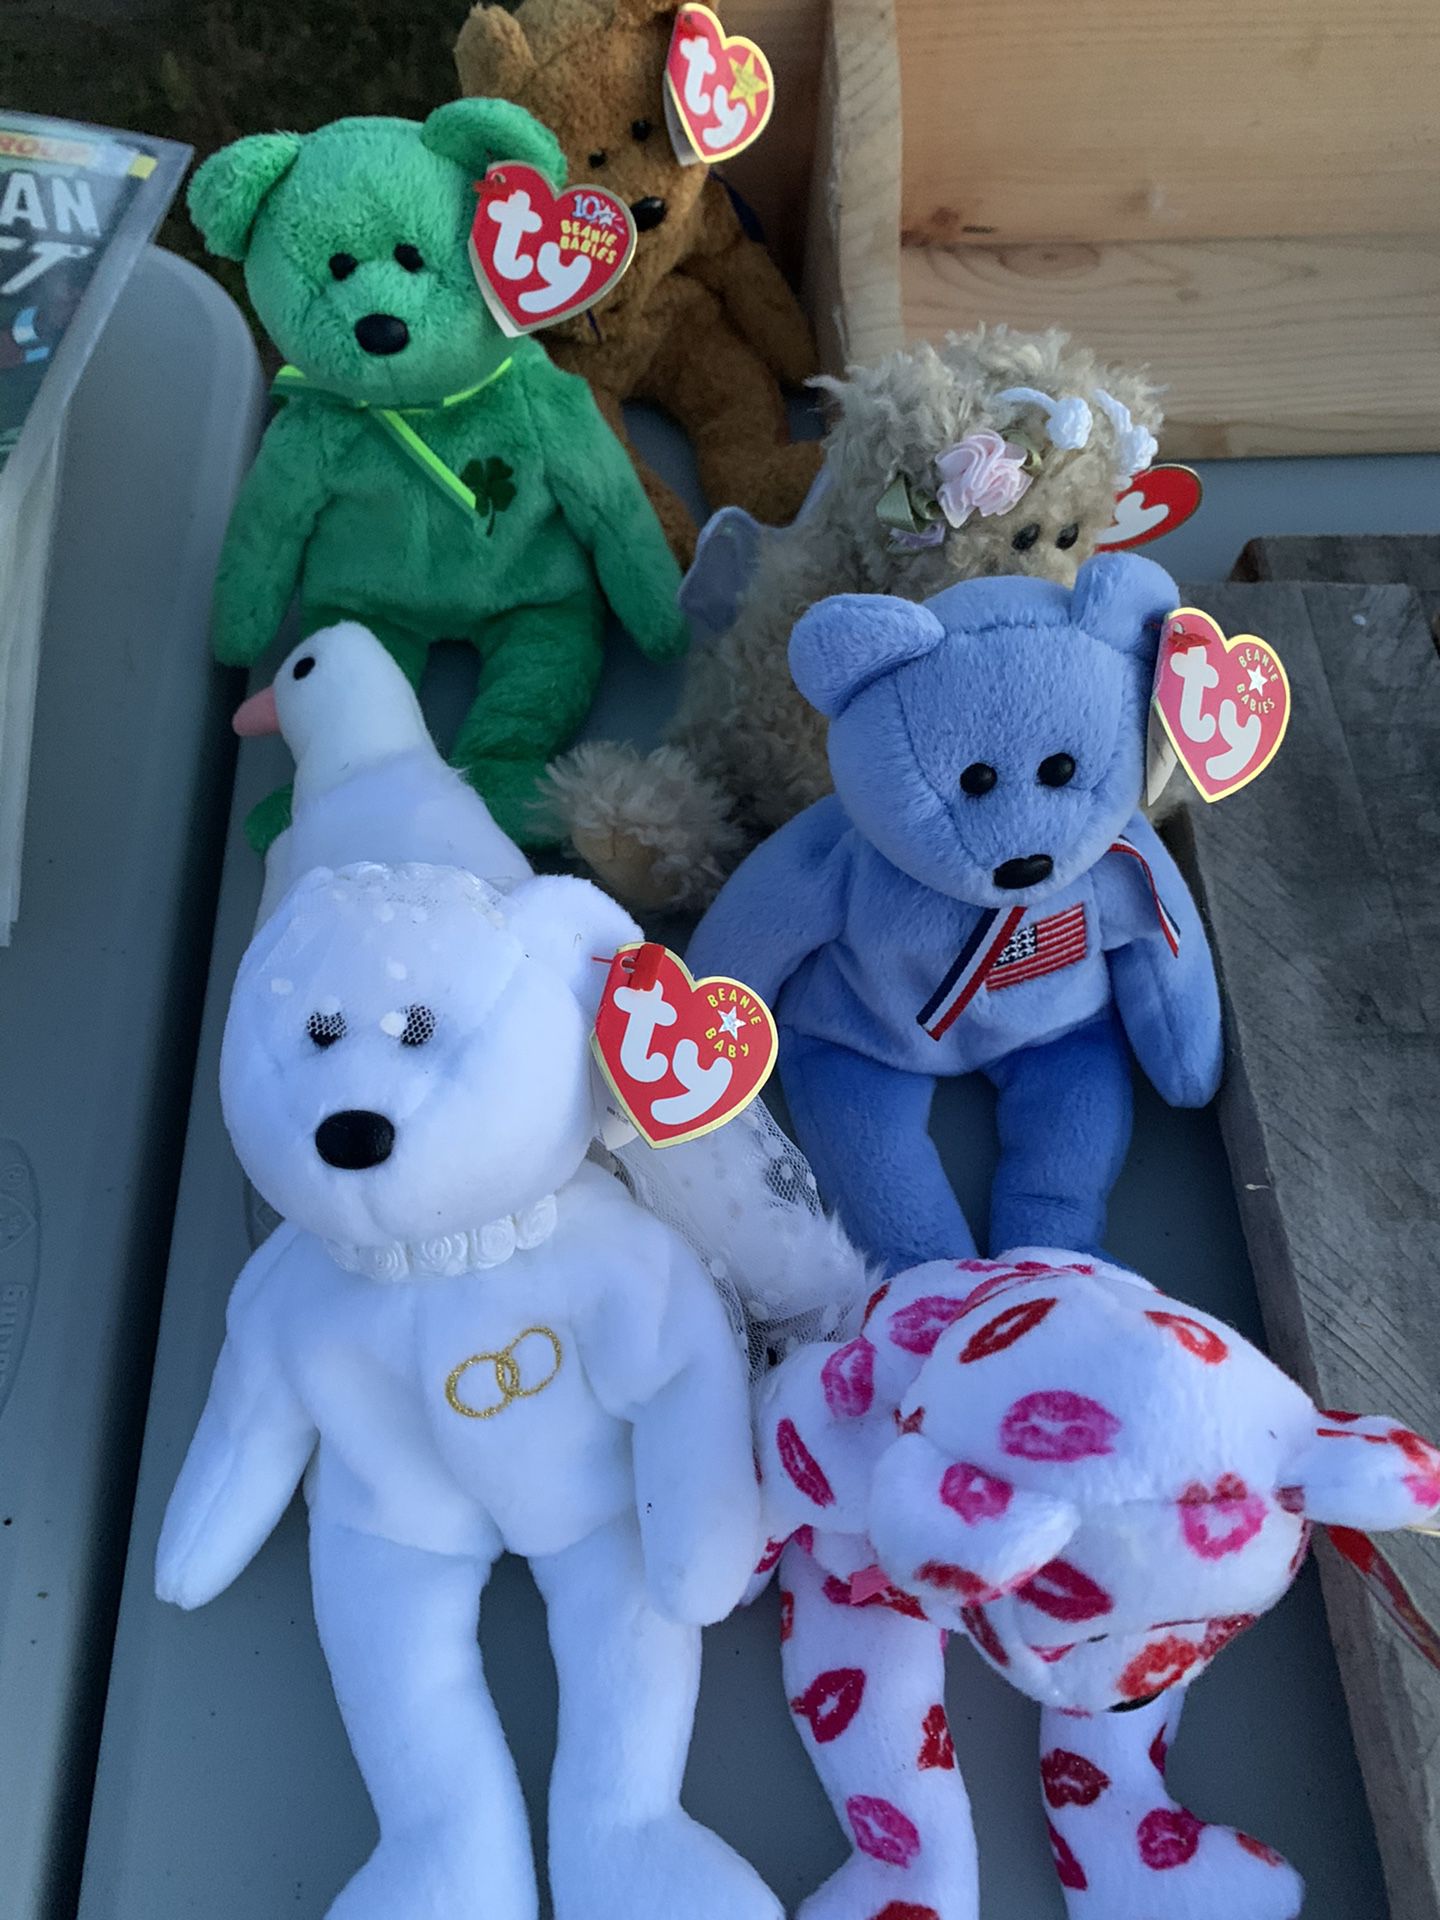 Five beanie babies. The swan is not available.